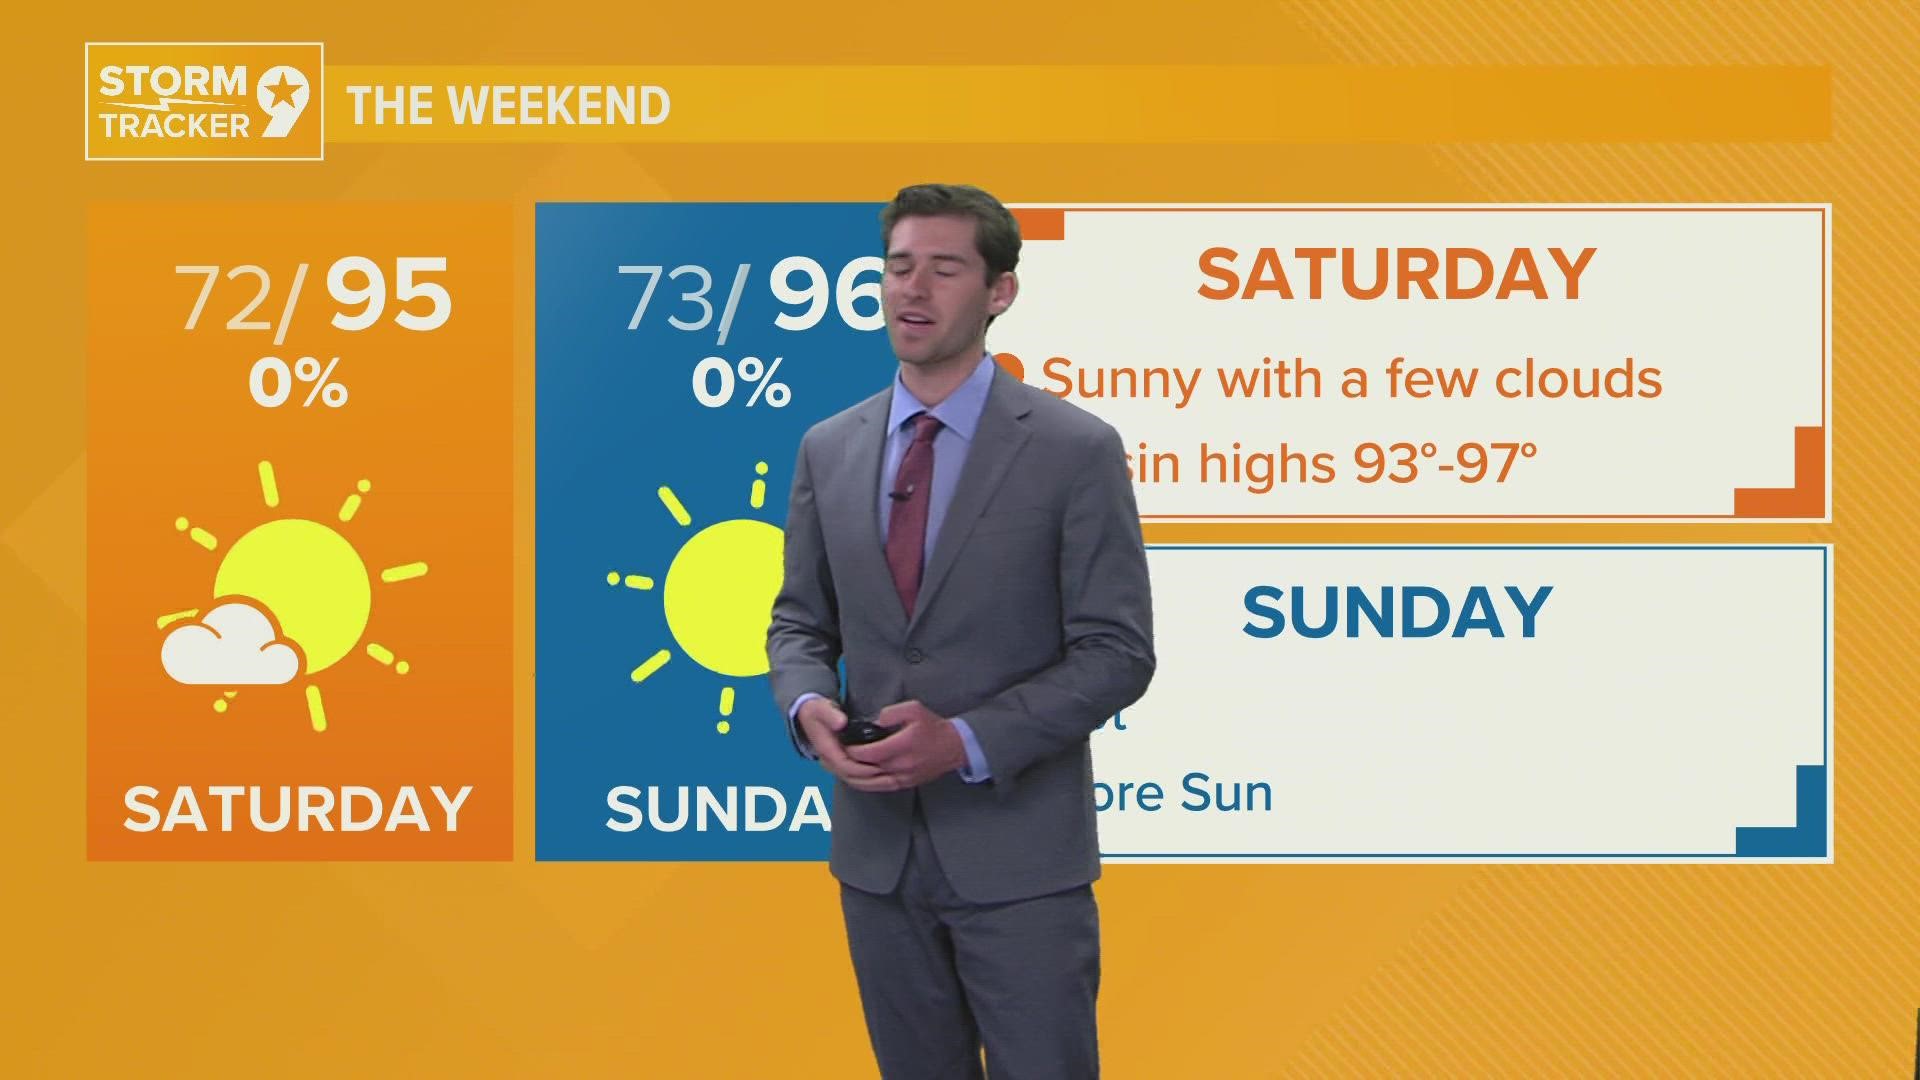 Great Weekend ahead of us with highs in the mid to upper-90s